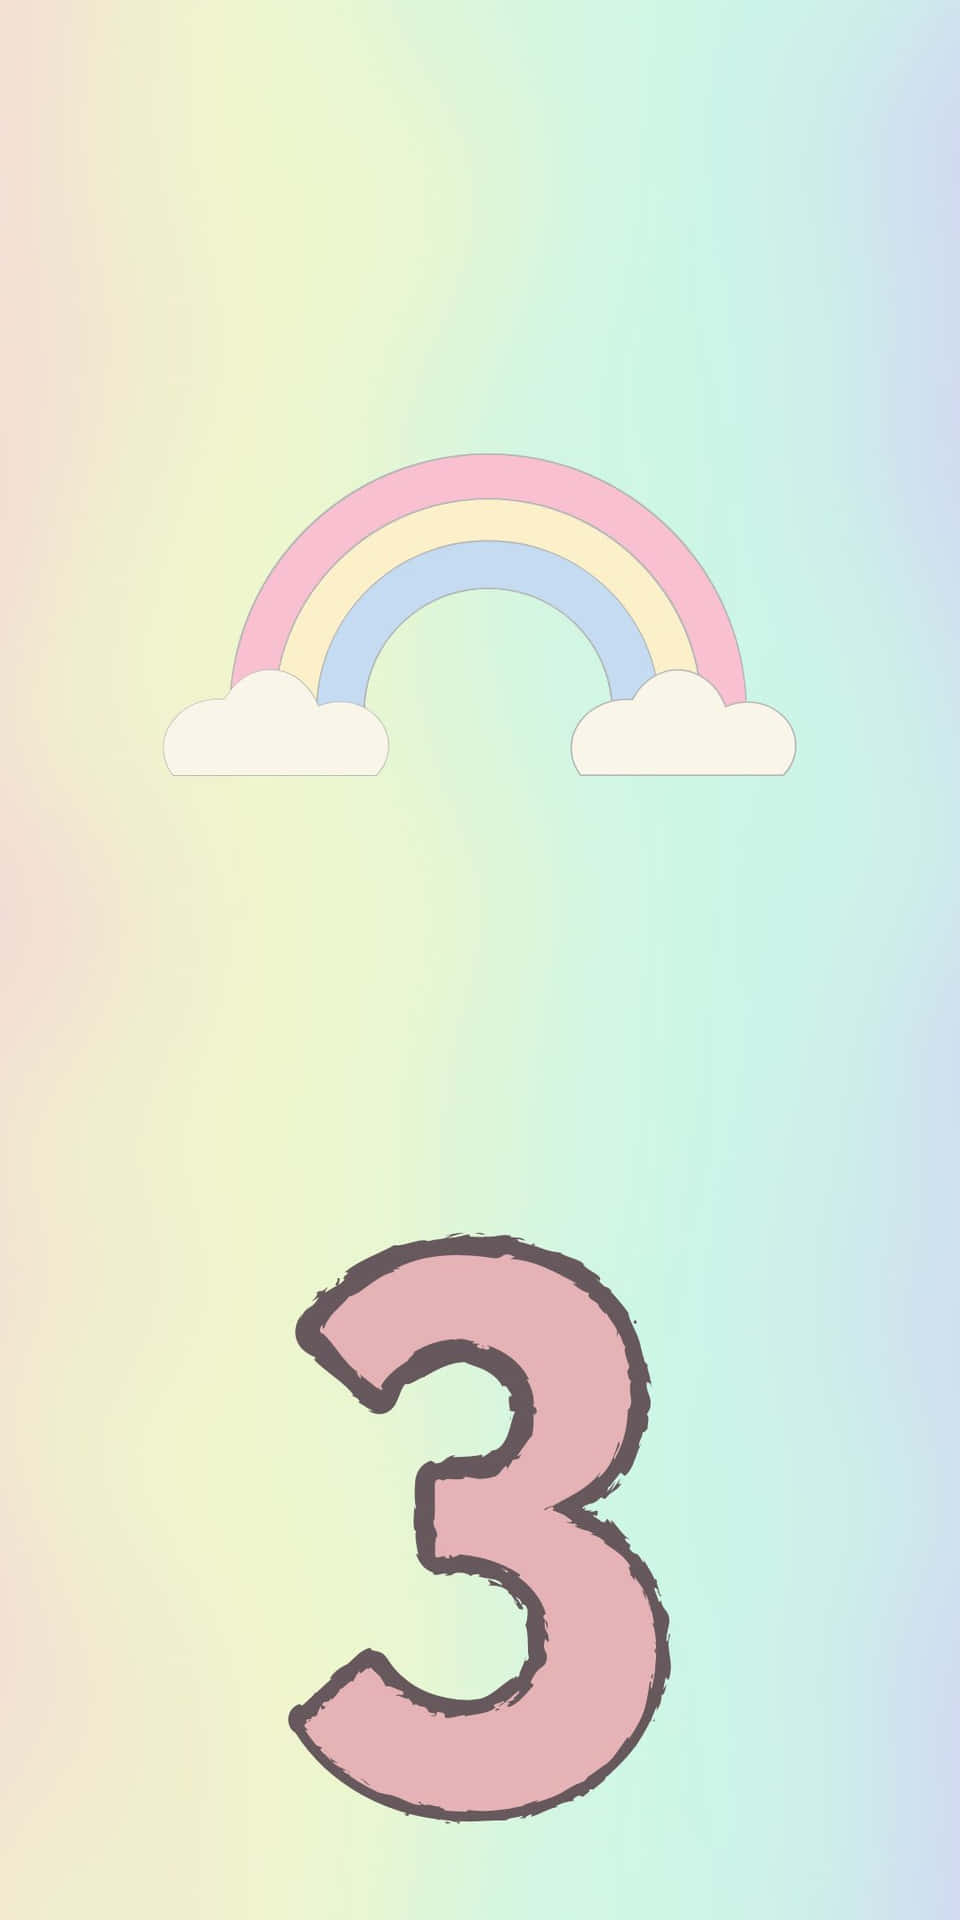 Pixel 3 Background With Cute Rainbow